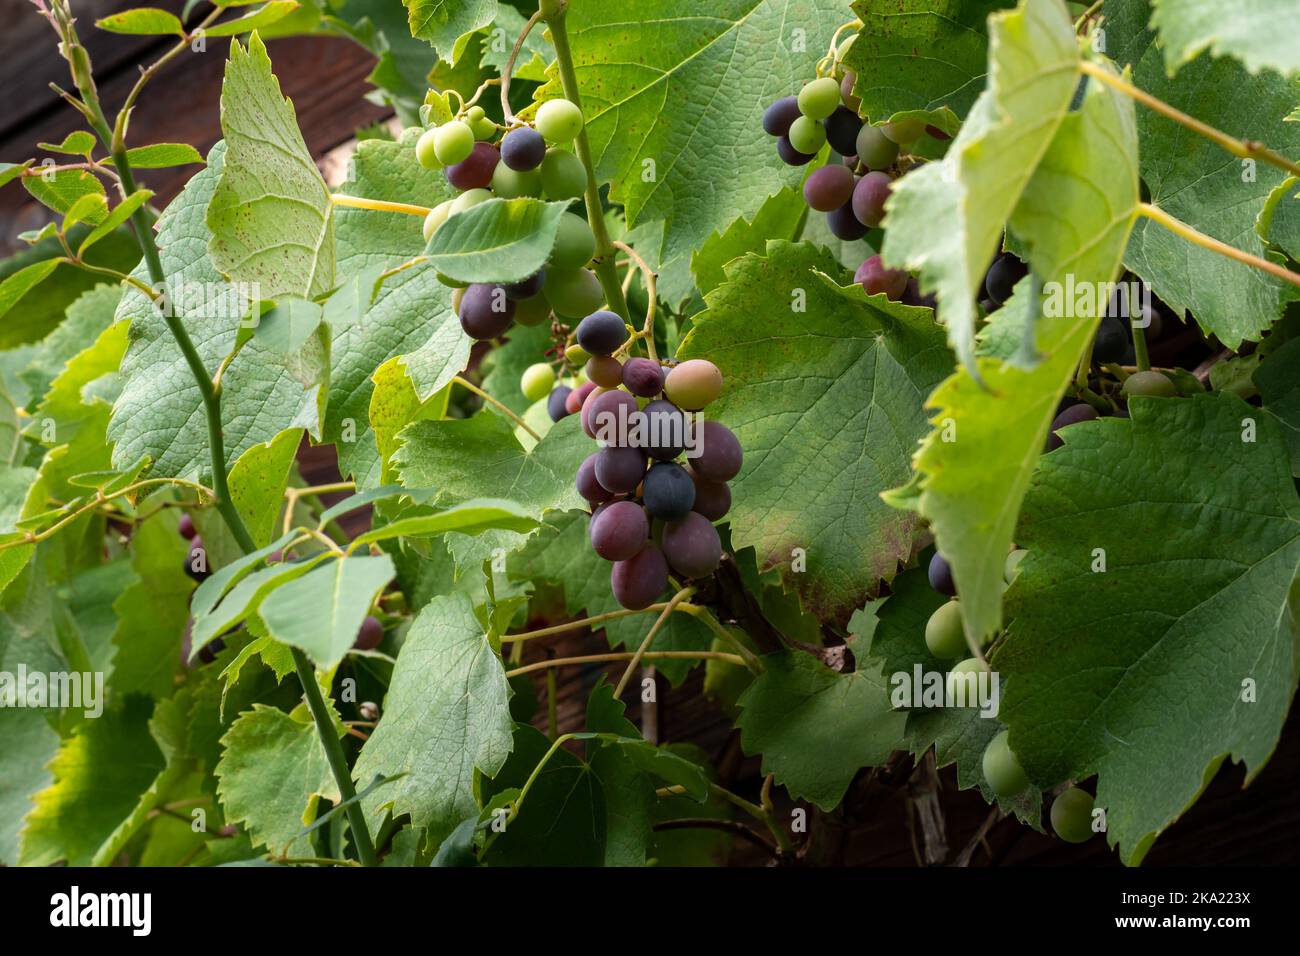 Red grapes are hanging on vines. Ripe sweet fruits cultivated in a German garden. Natural food in organic quality is growing during the summer season. Stock Photo